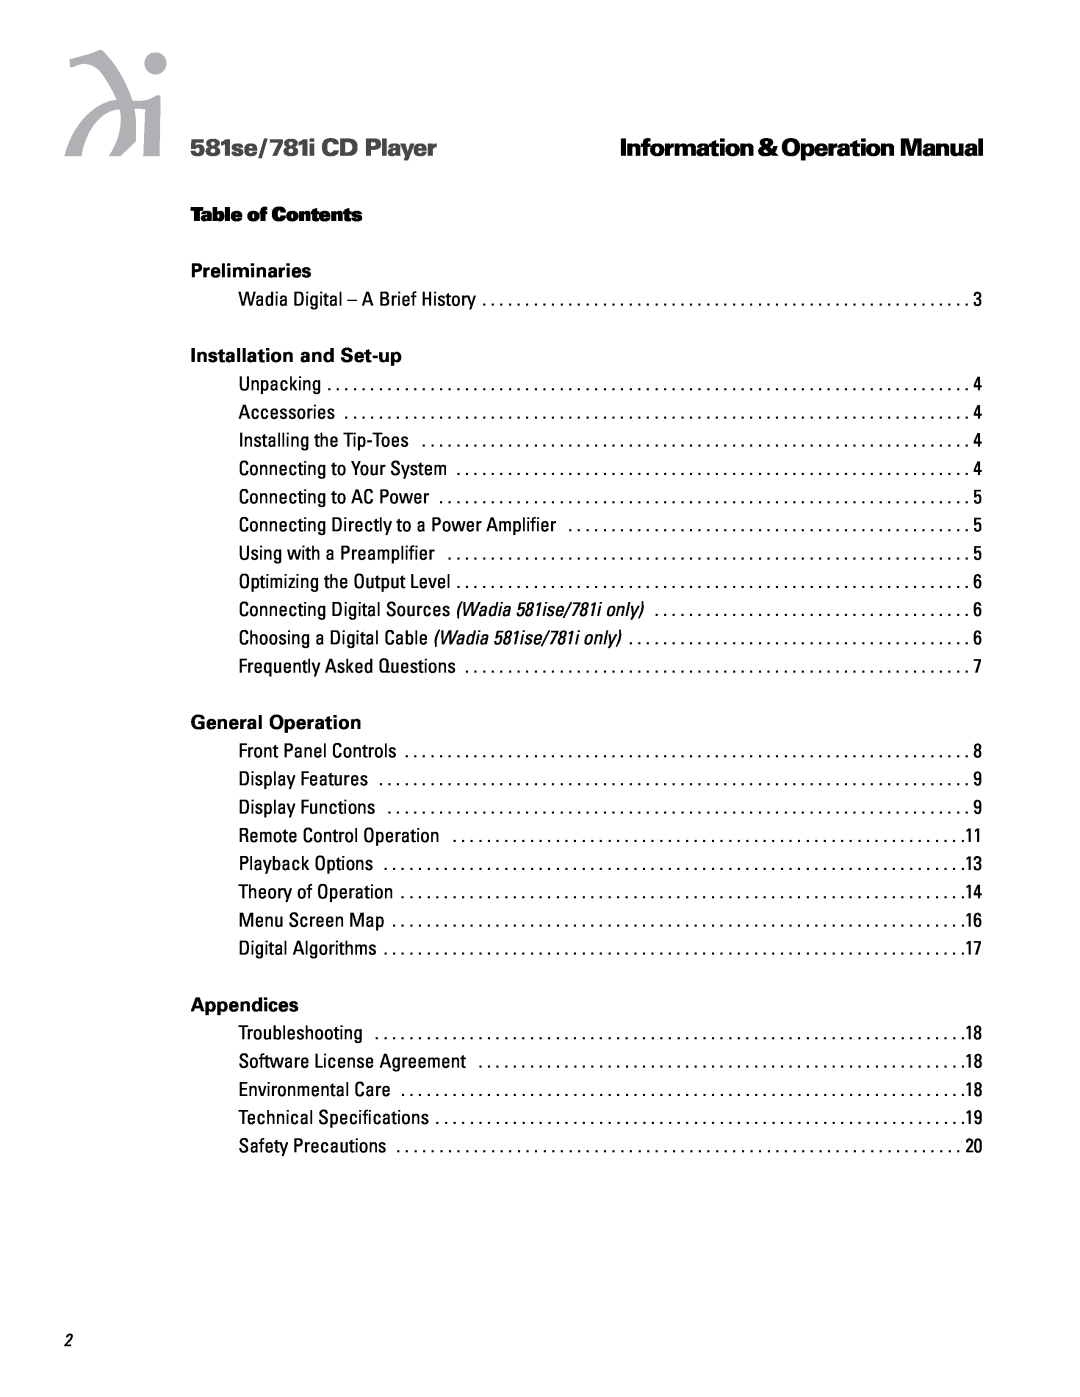 Wadia Digital 581SE, 781I Table of Contents Preliminaries, Installation and Set-up, General Operation, Appendices 